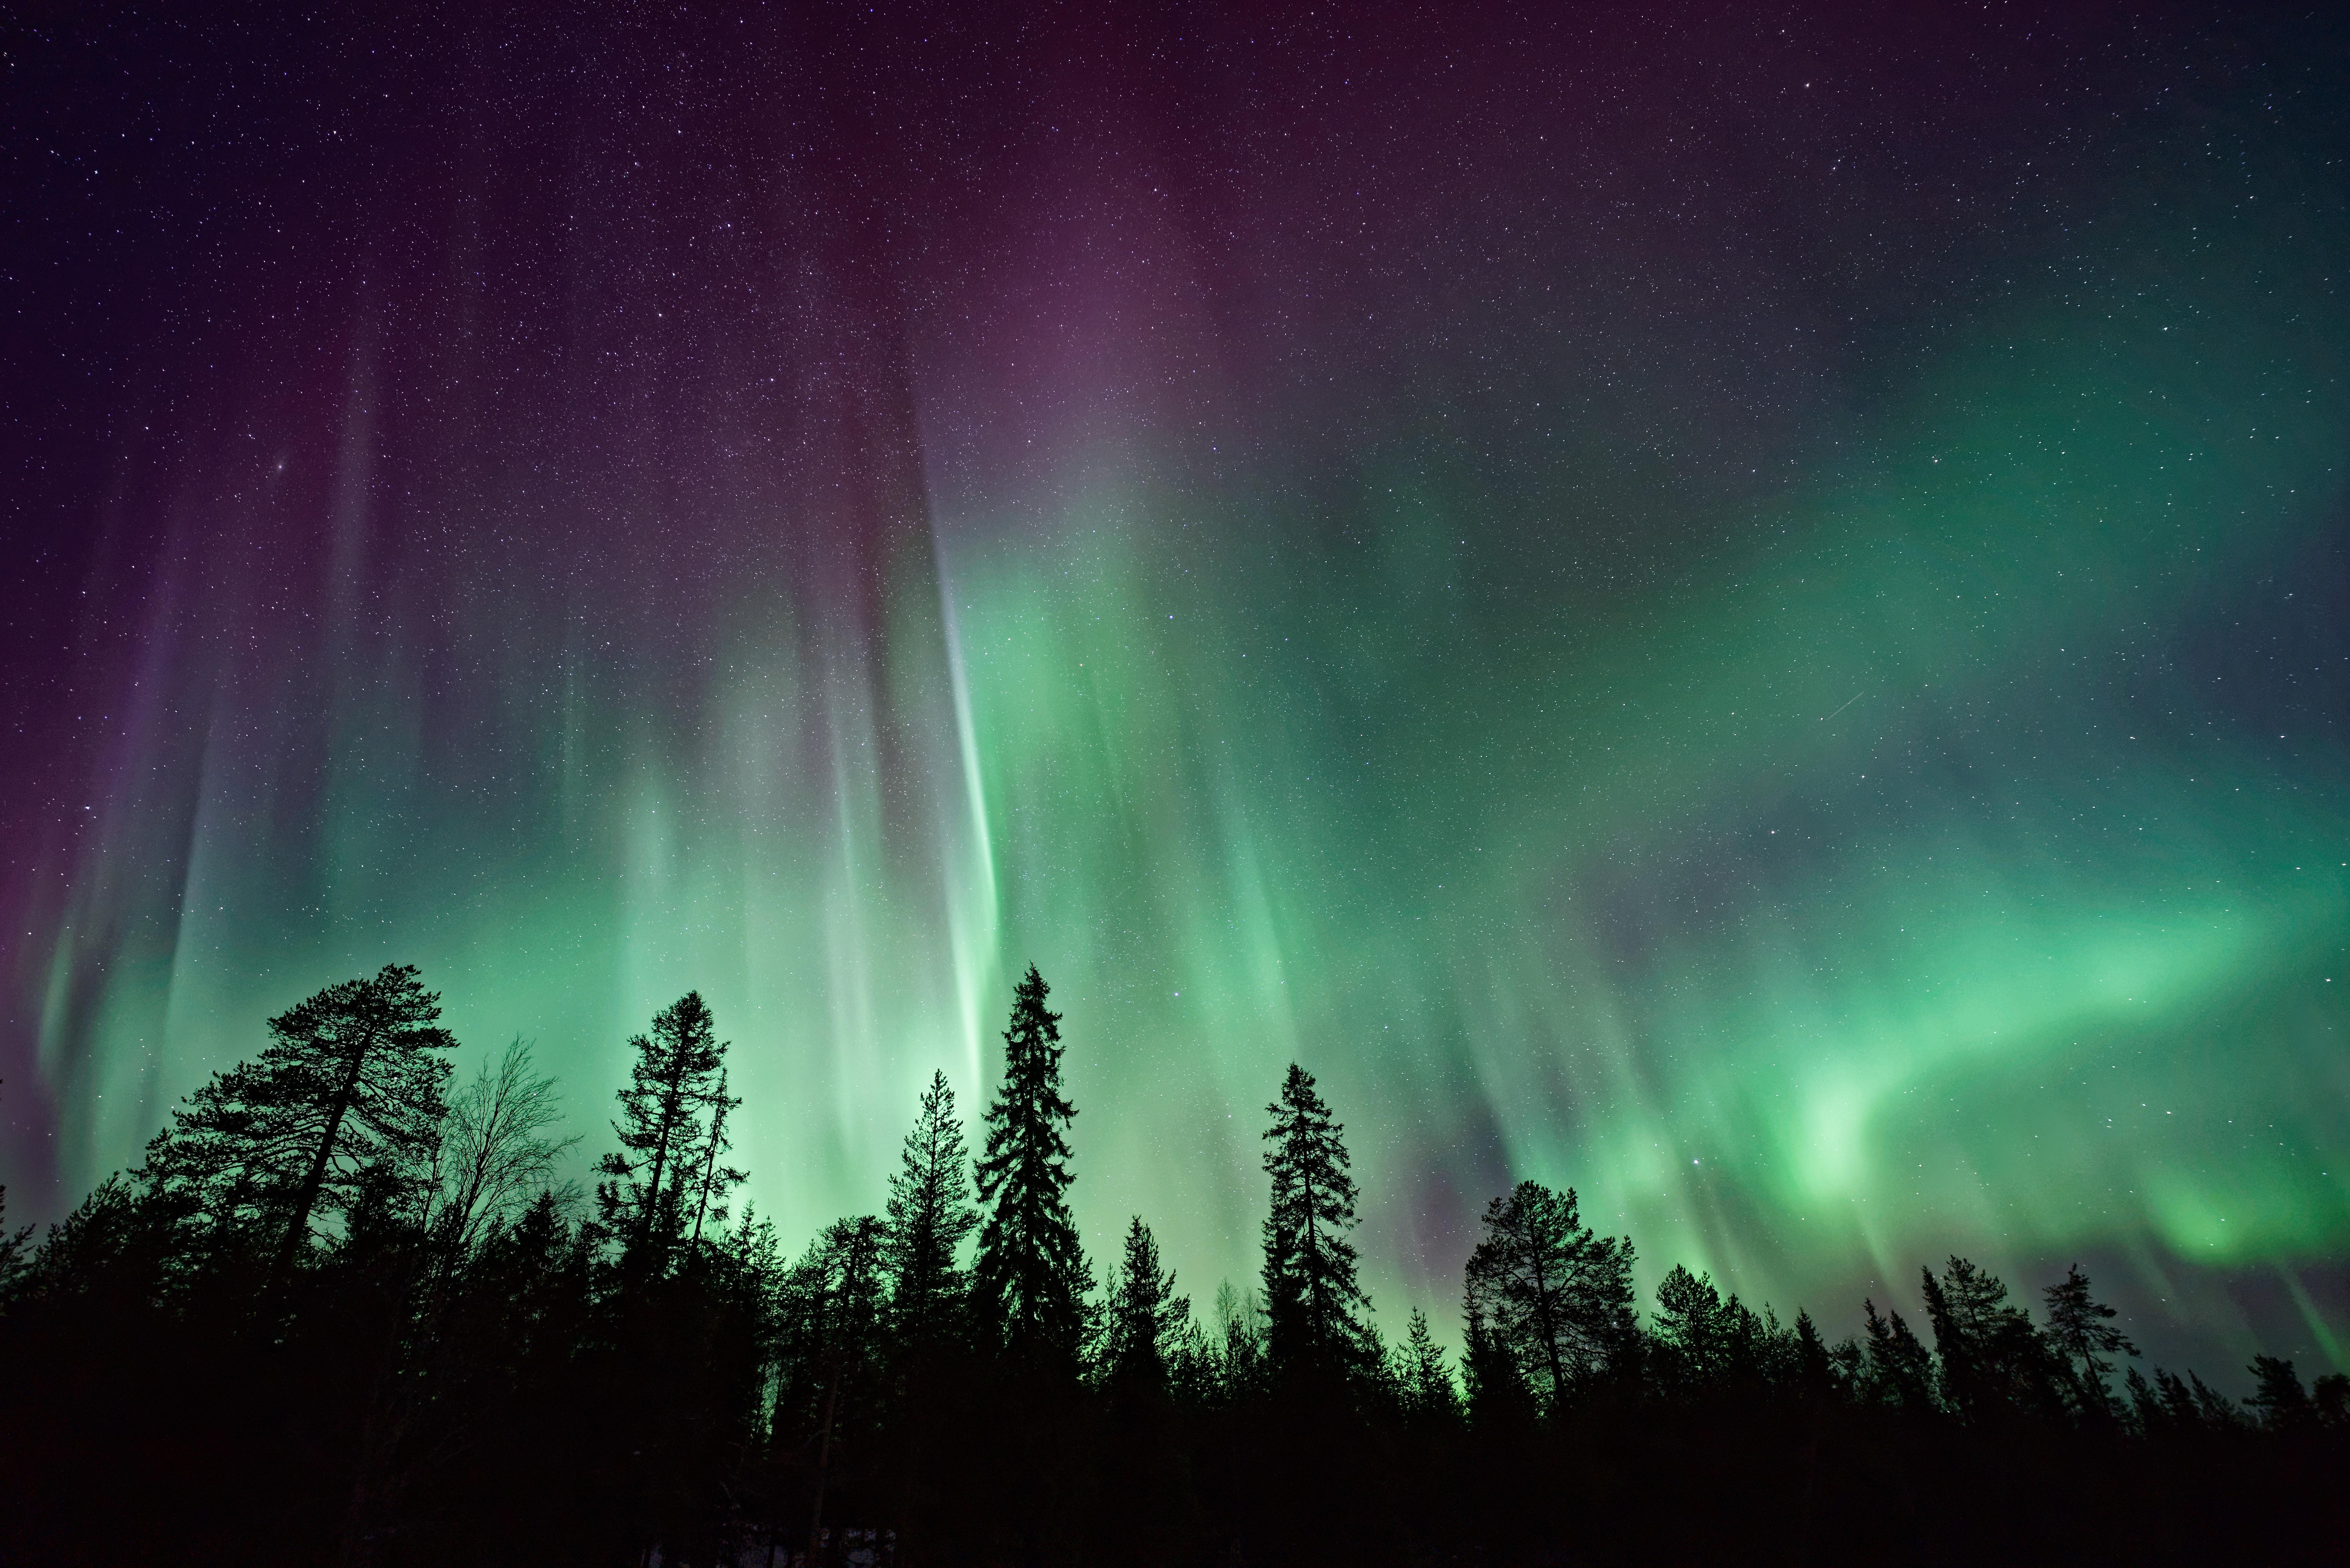 Northern Lights Wallpaper. Download Free Image On